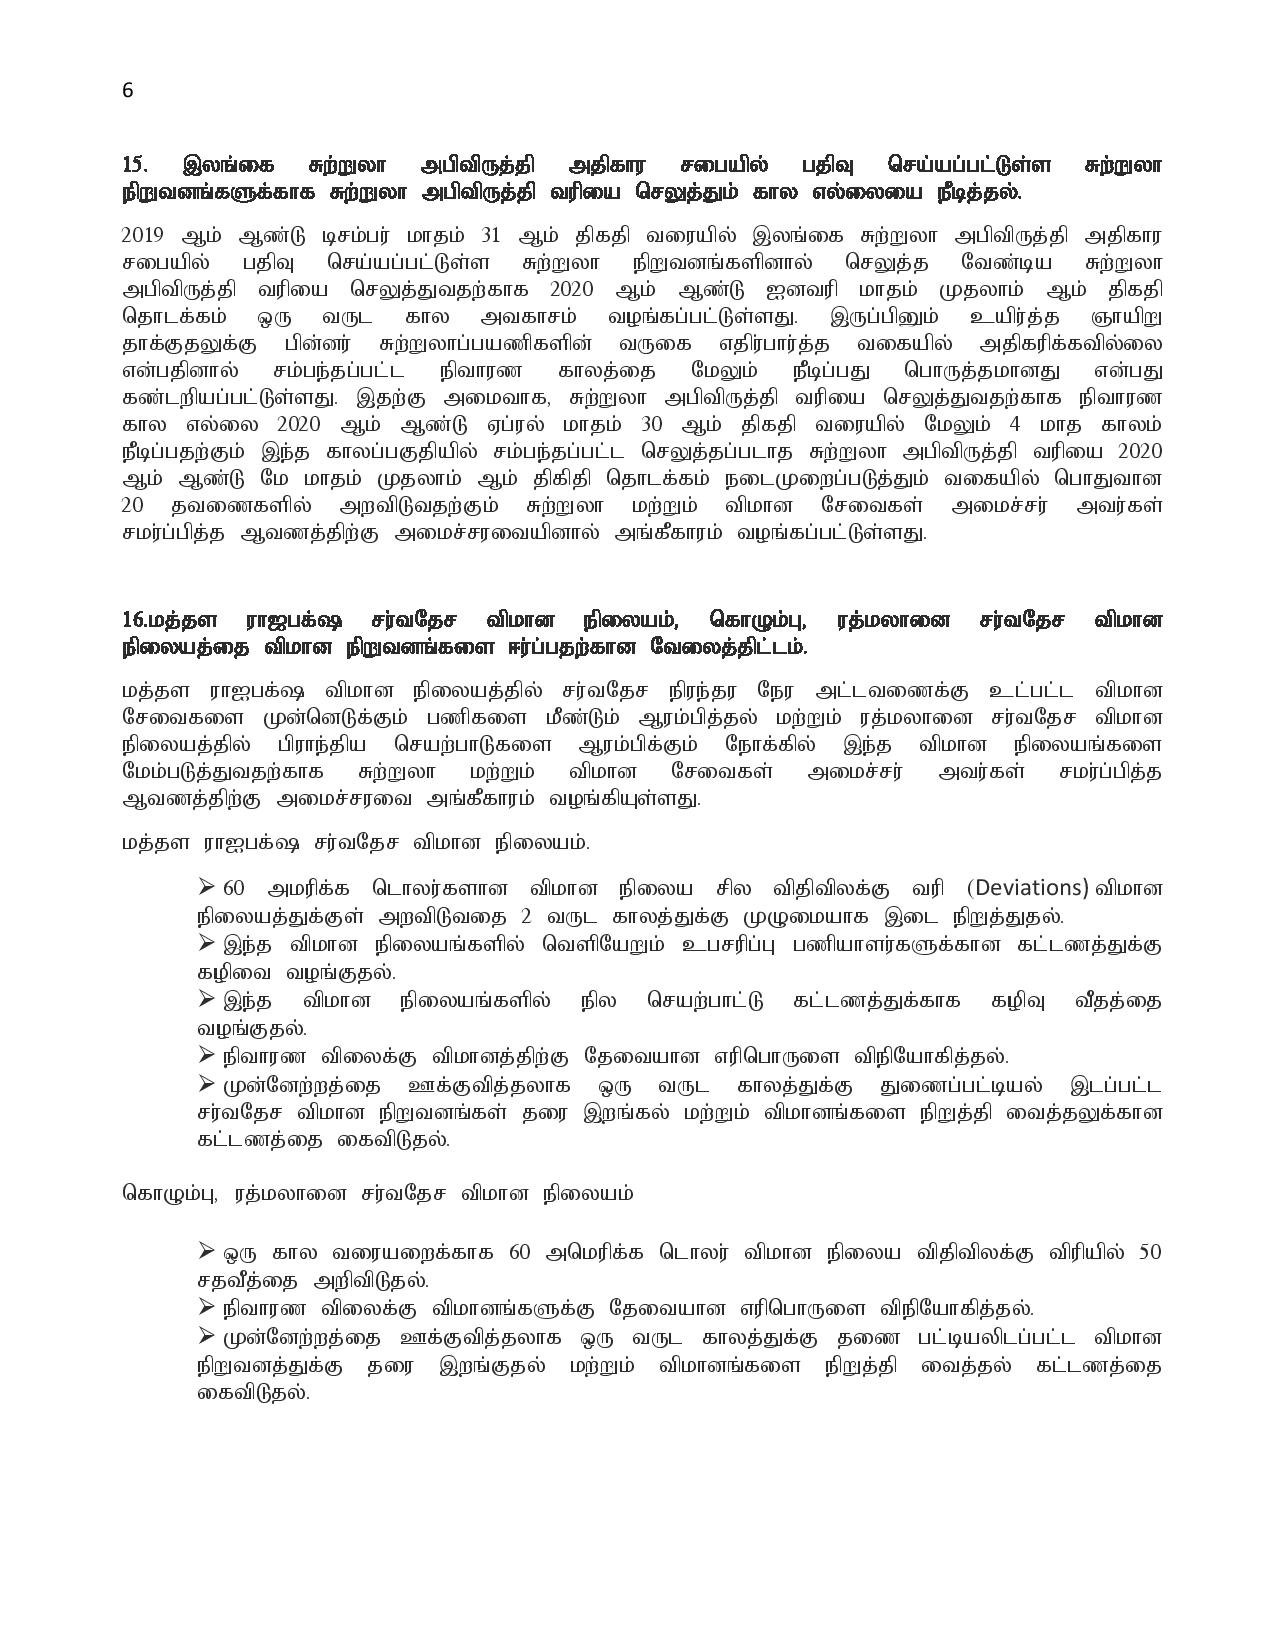 2020.02.27 cabinet tamil page 006